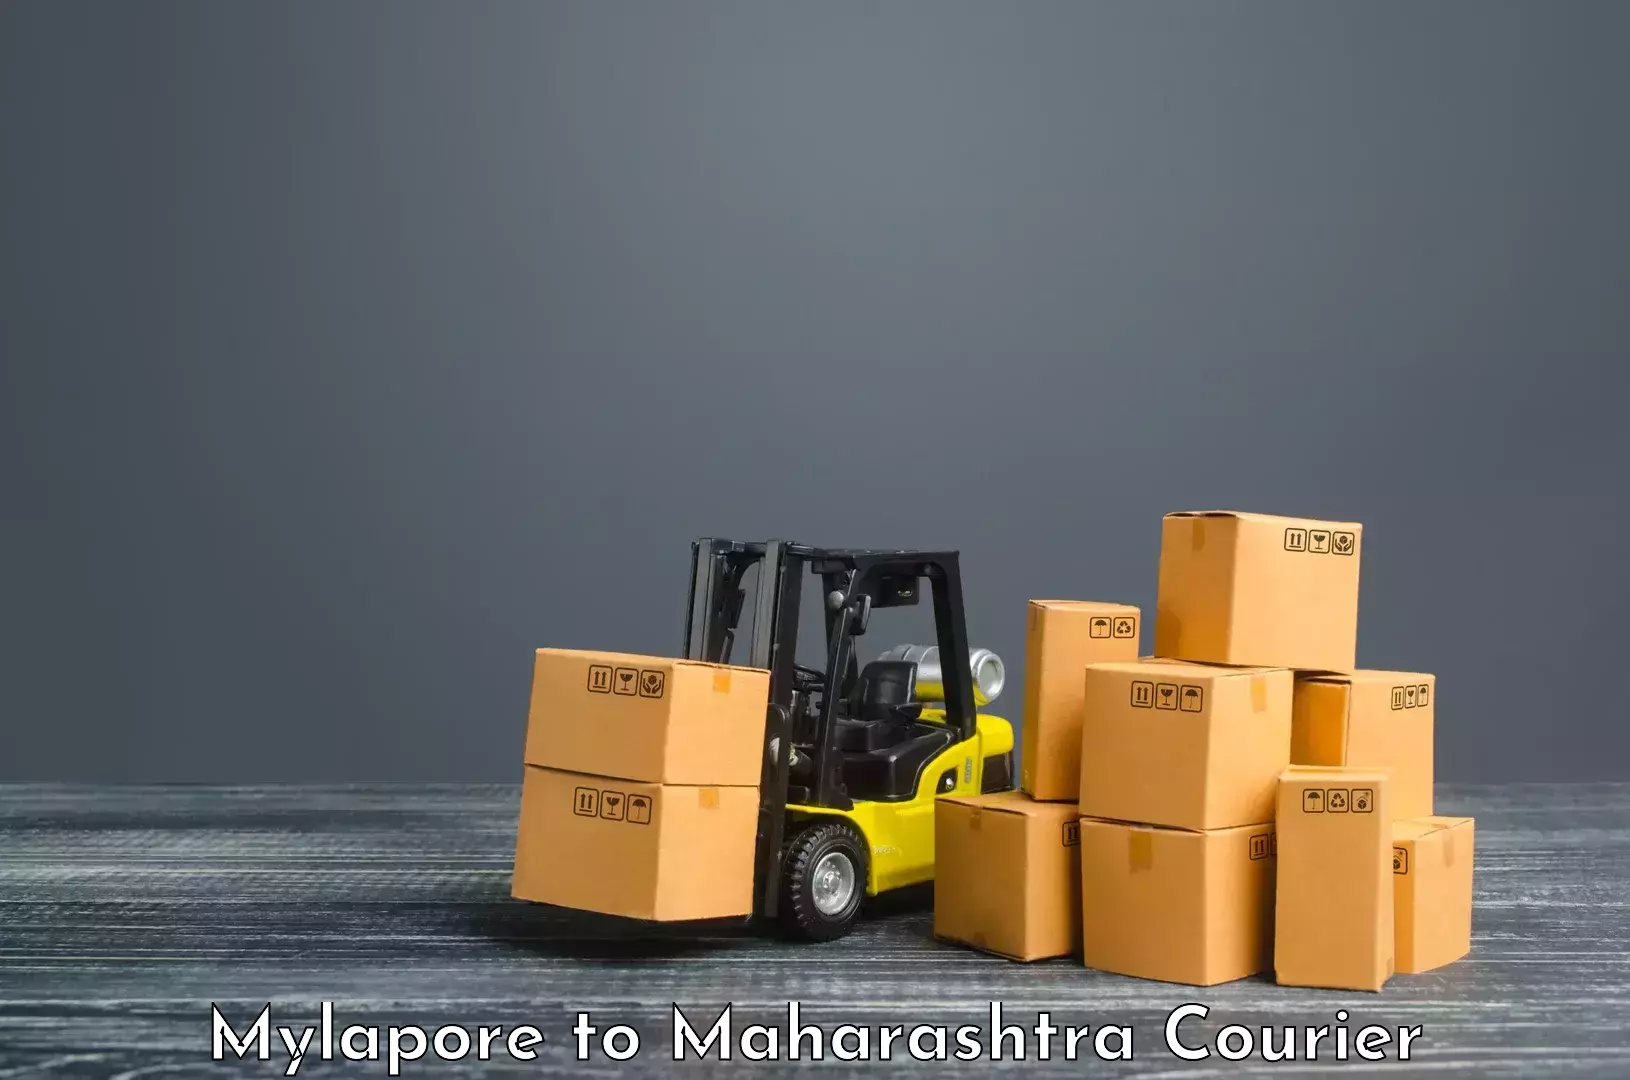 Reliable courier service in Mylapore to Mumbai